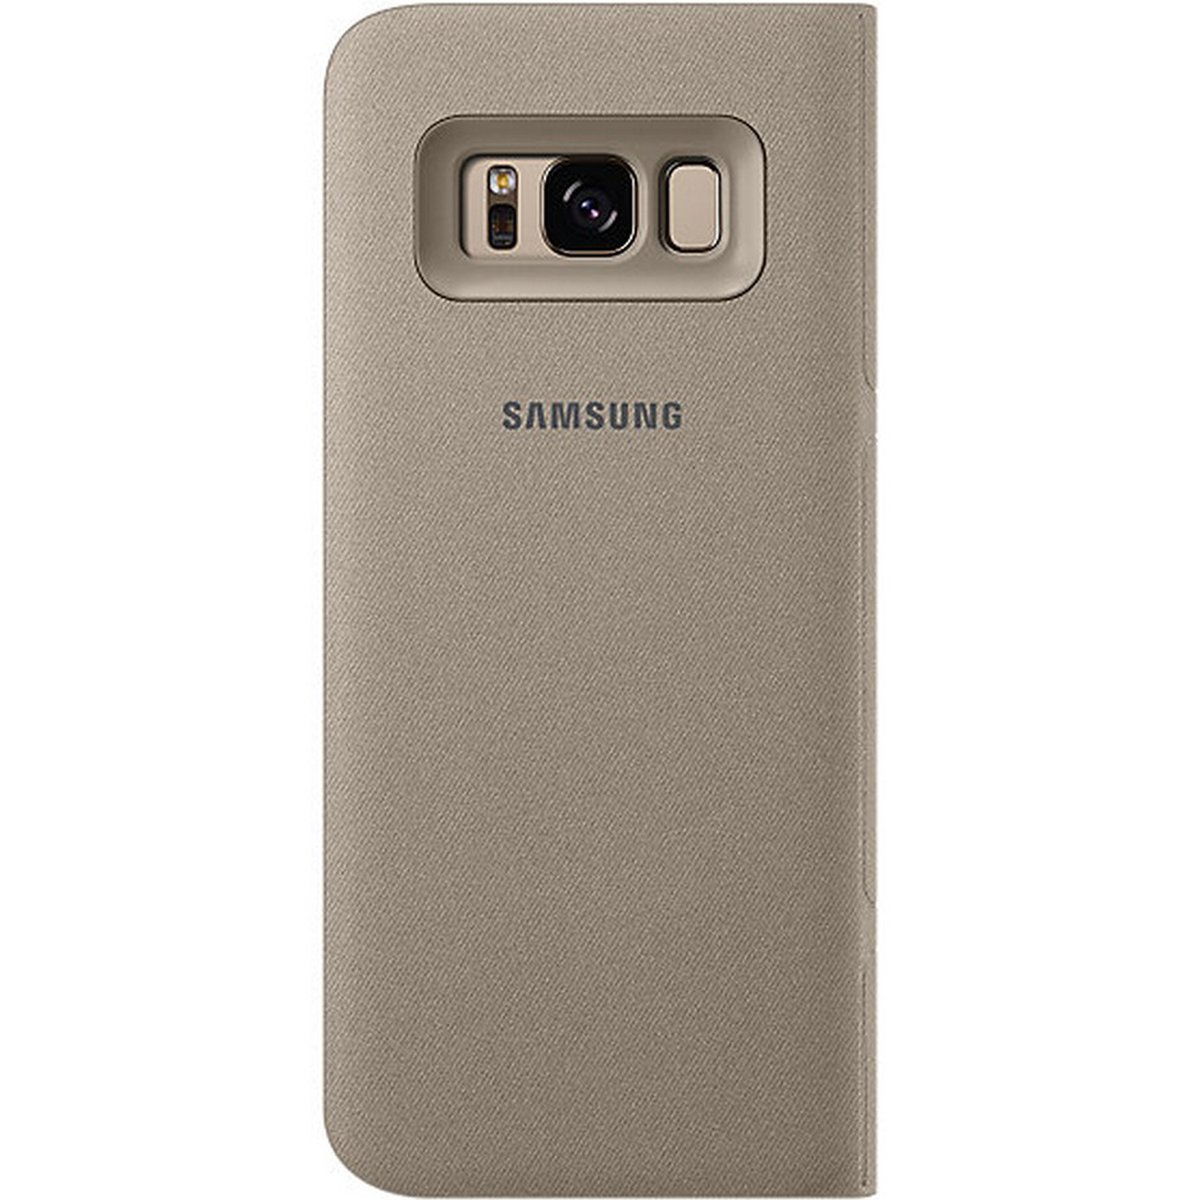 Samsung Galaxy S8 LED View Cover Gold